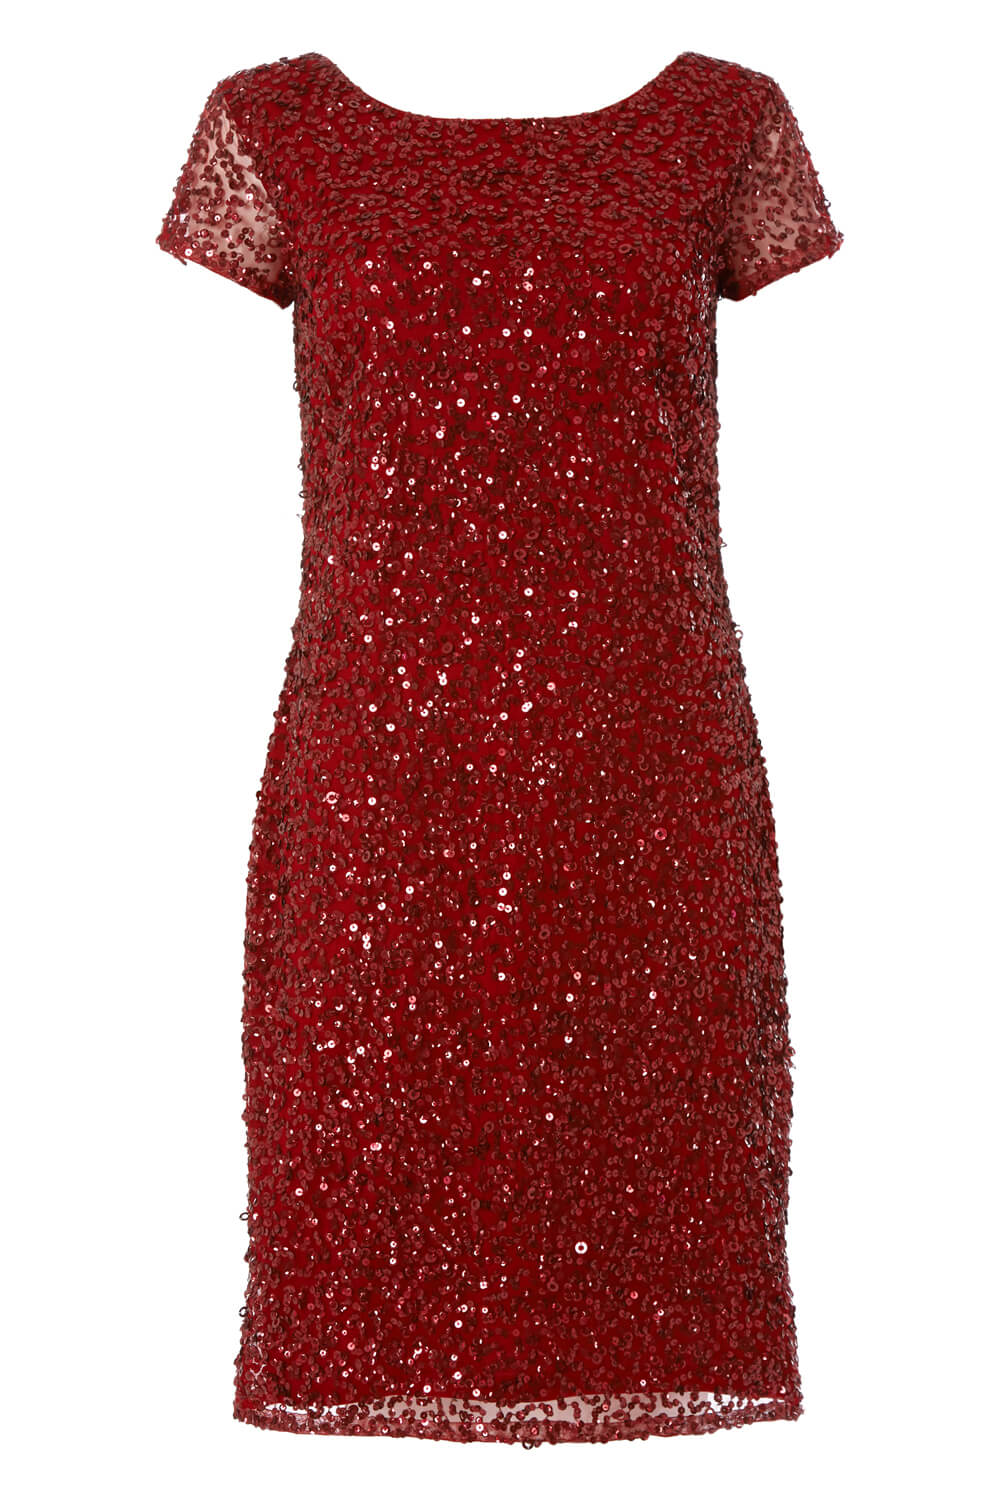 Red All Over Sequin Dress, Image 5 of 5